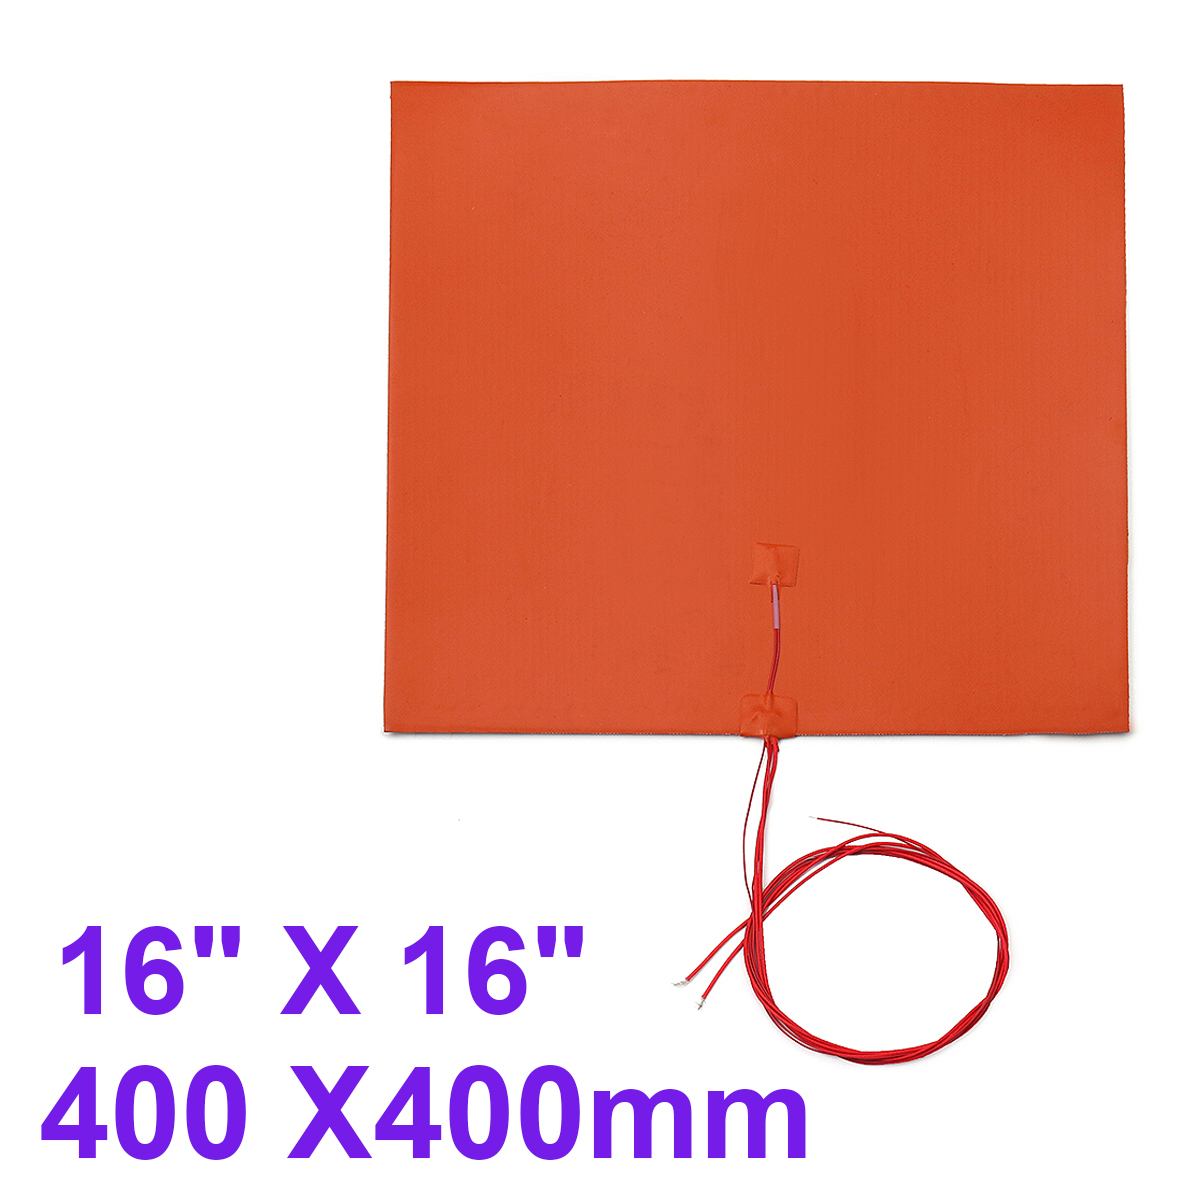 1400w 240V 400*400mm Silicone Heater Bed Pad For 3D Printer Without Hole 1